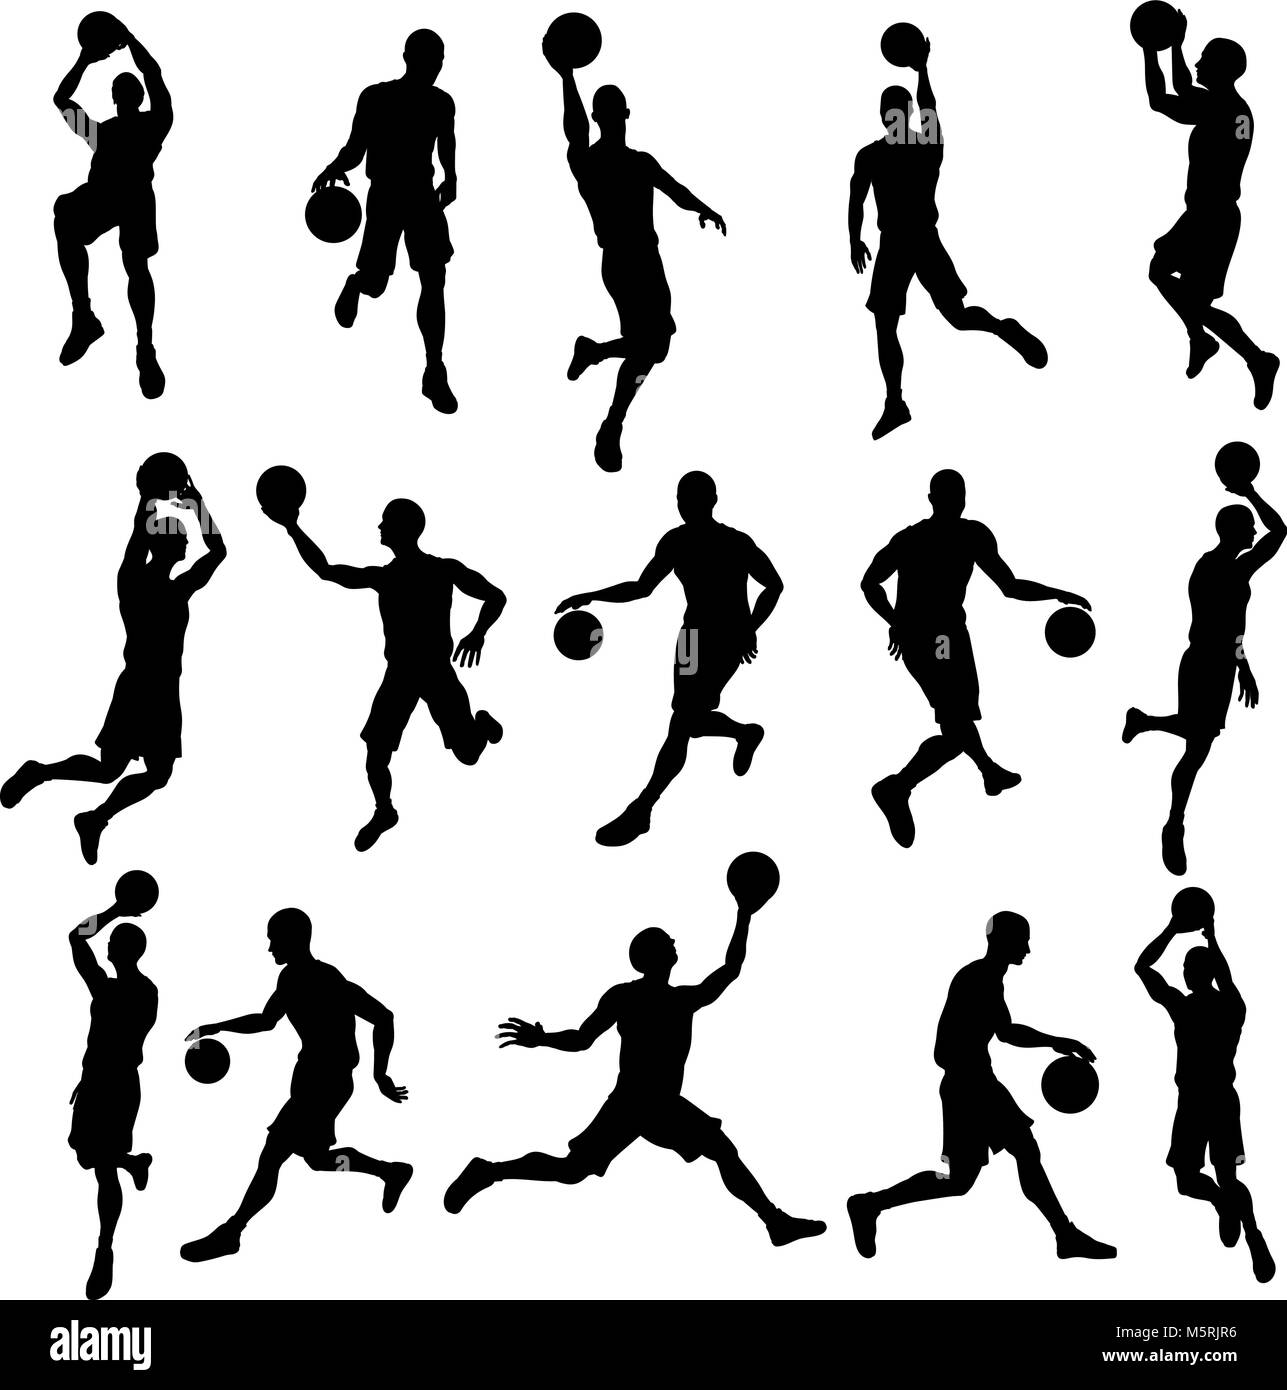 Basketball Player Silhouettes Stock Vector